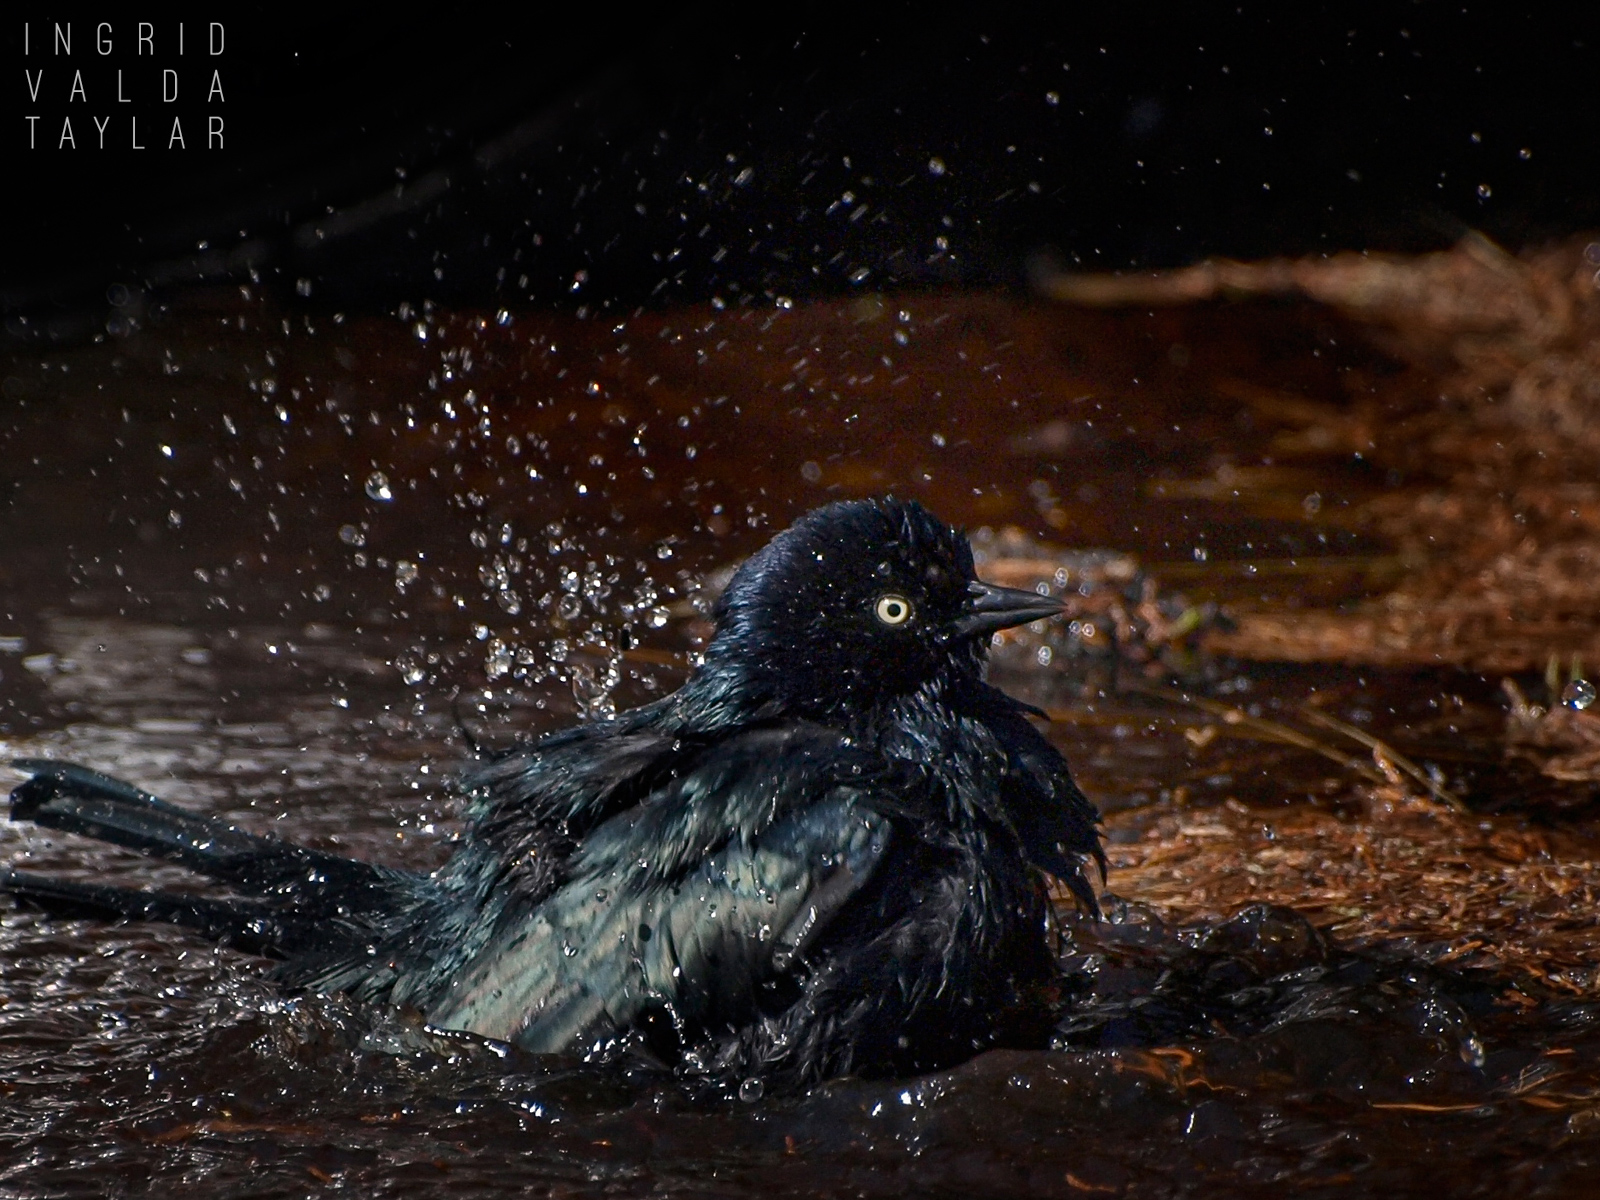 Brewer's Blackbird Bathing in Puddle